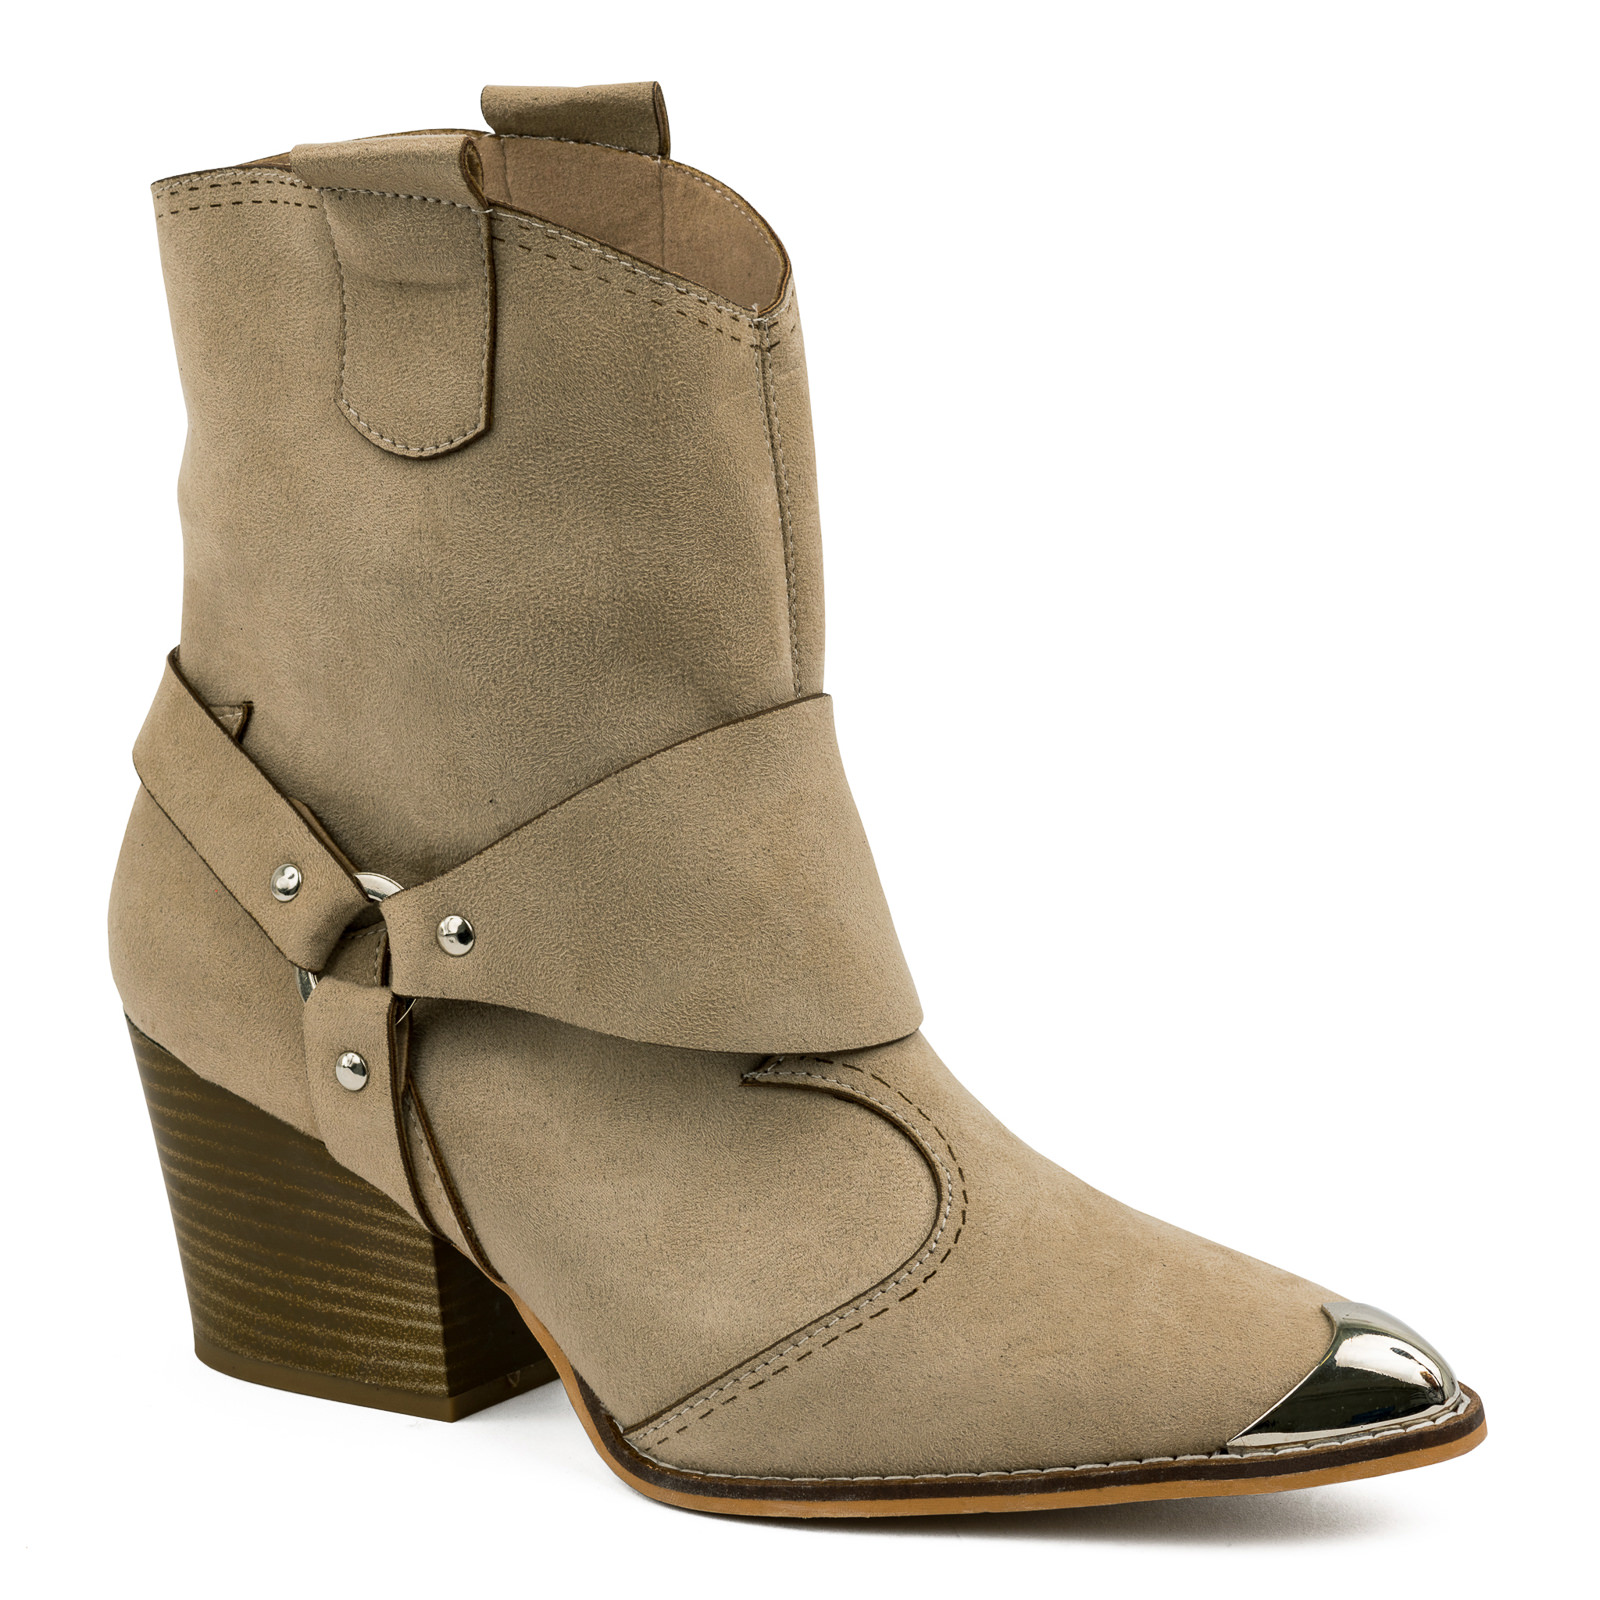 VELOUR SPIKE COW GIRL WITH THICK HEEL AND RIVETS - BEIGE